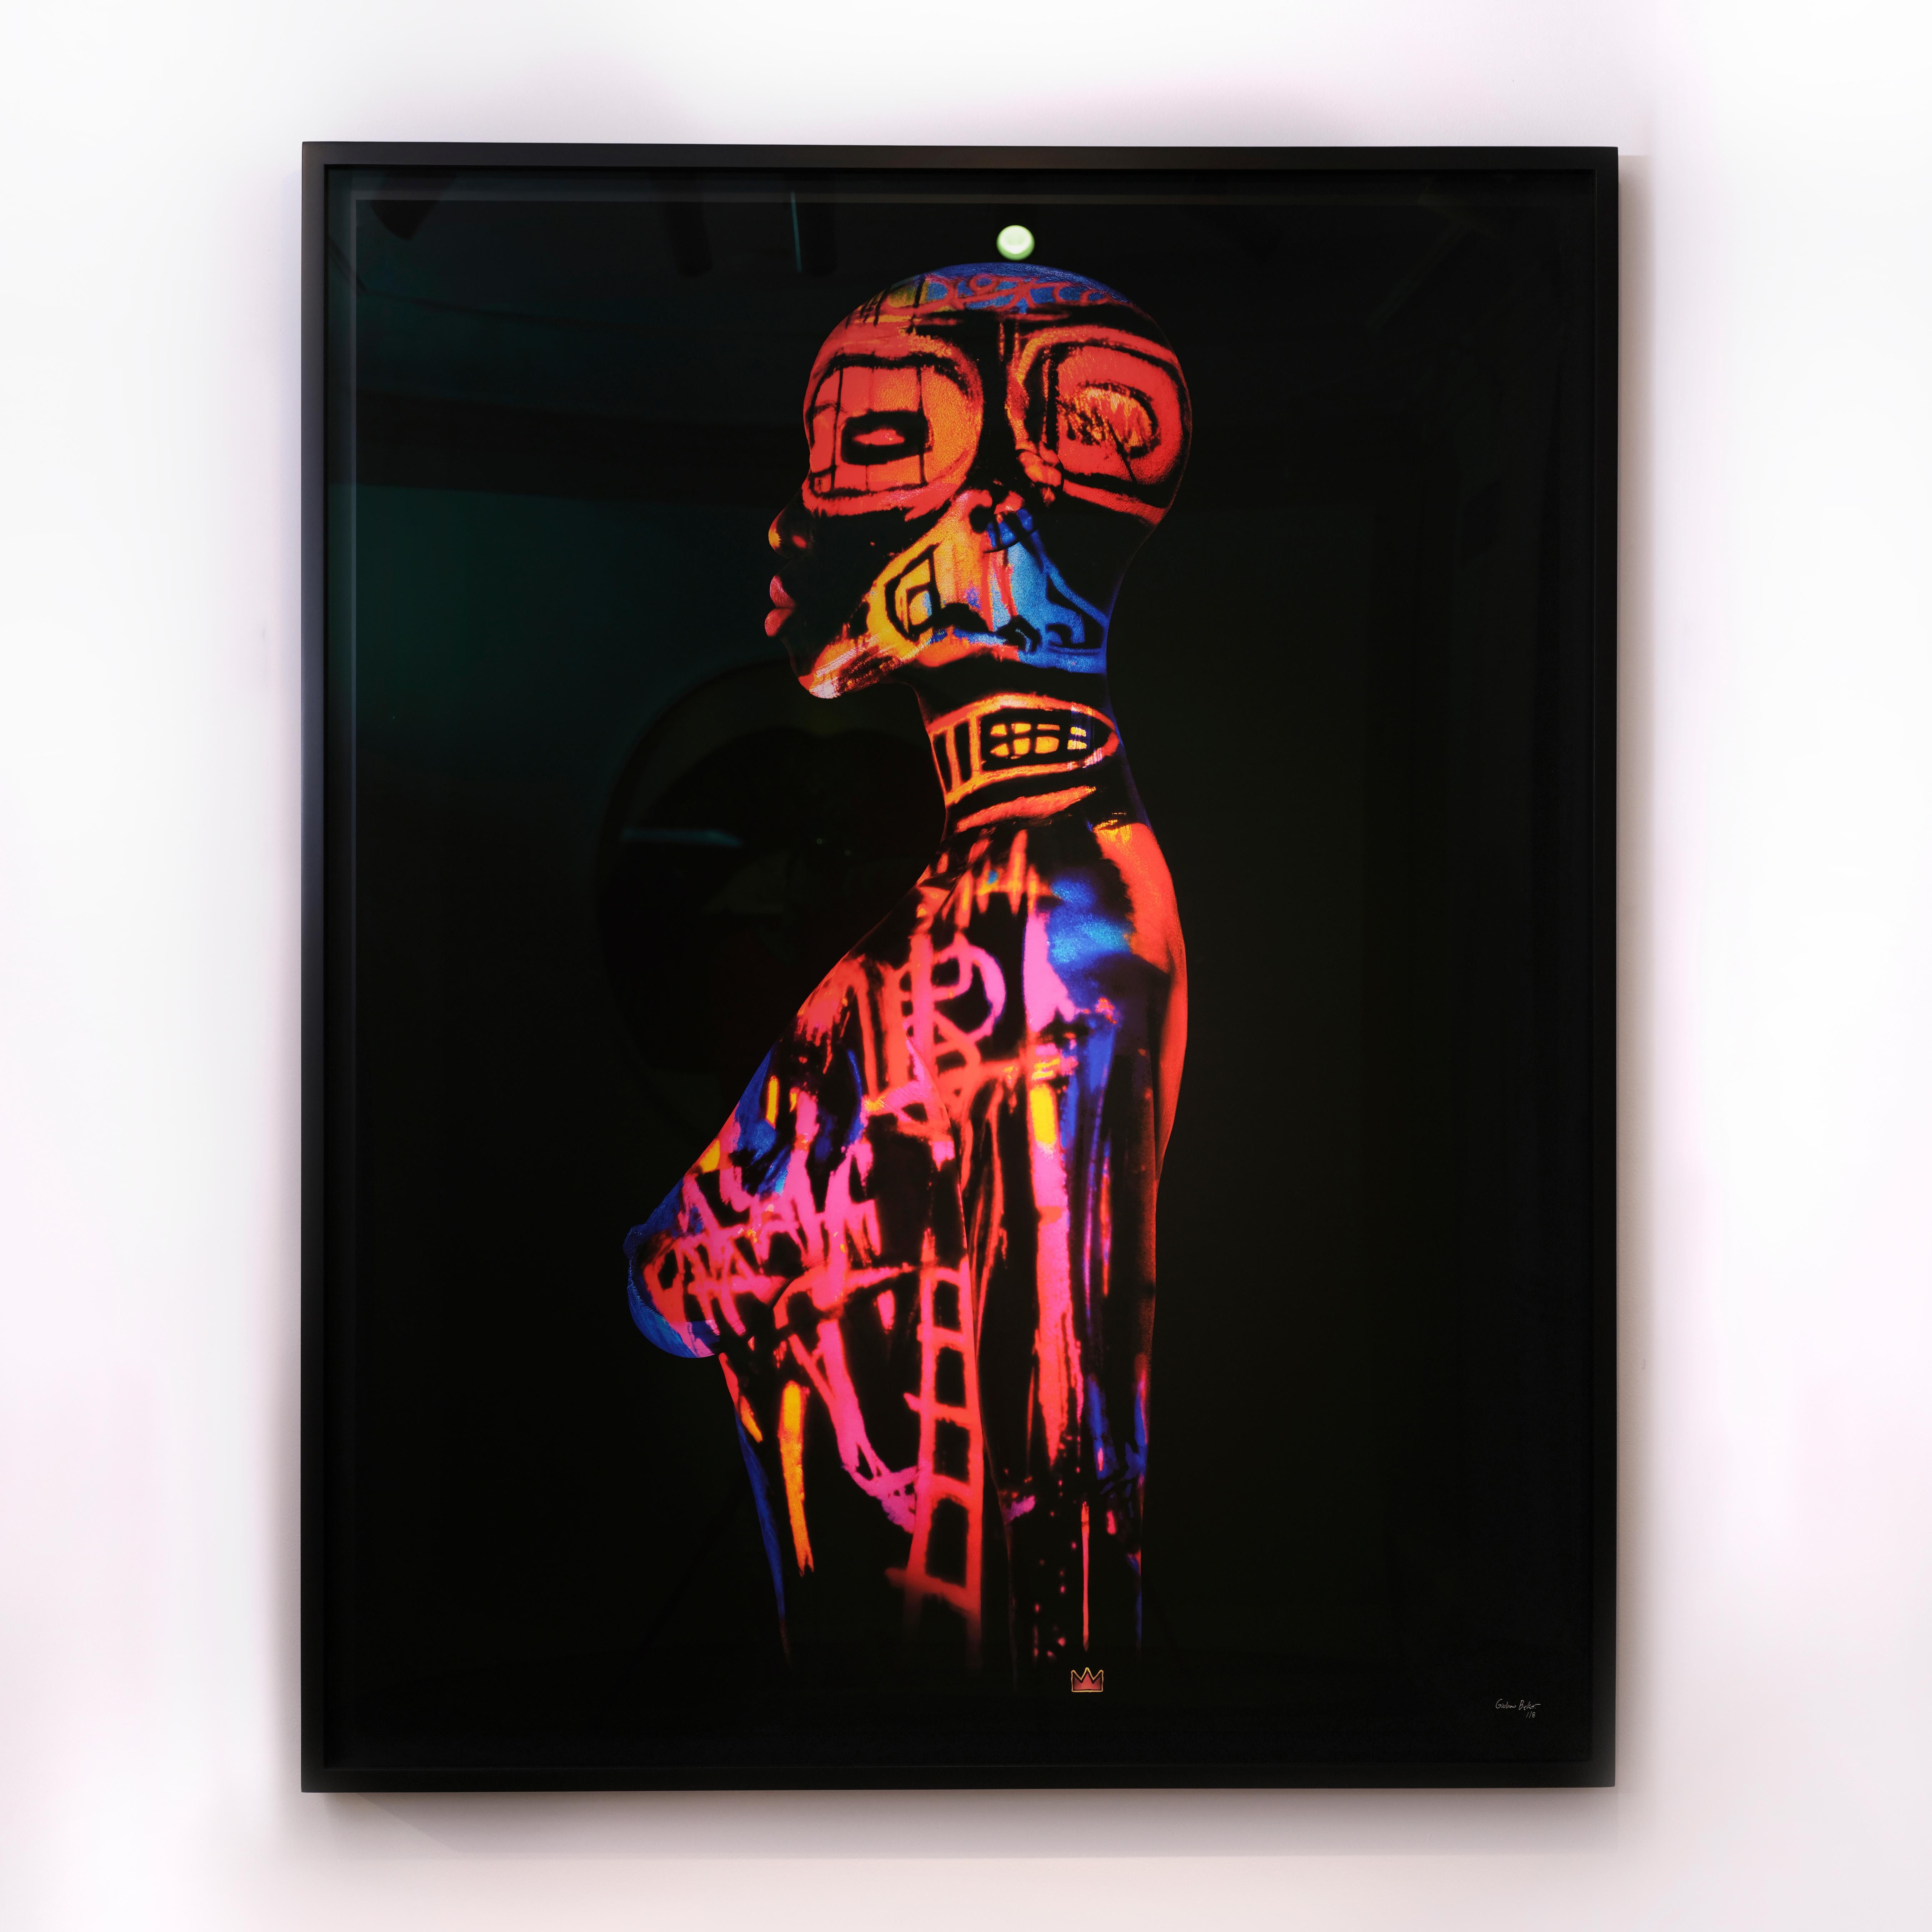 "JM Basquiat-GB1" Photography (FRAMED) 50" x 40" inch Ed. of 8 by Giuliano Bekor

Original fine art photography by Giuliano Bekor
Signed and numbered by the artist

Title: Basquiat series - JMB-GB1 
Year: 2020
Print size: 50" x 40" Inches trim